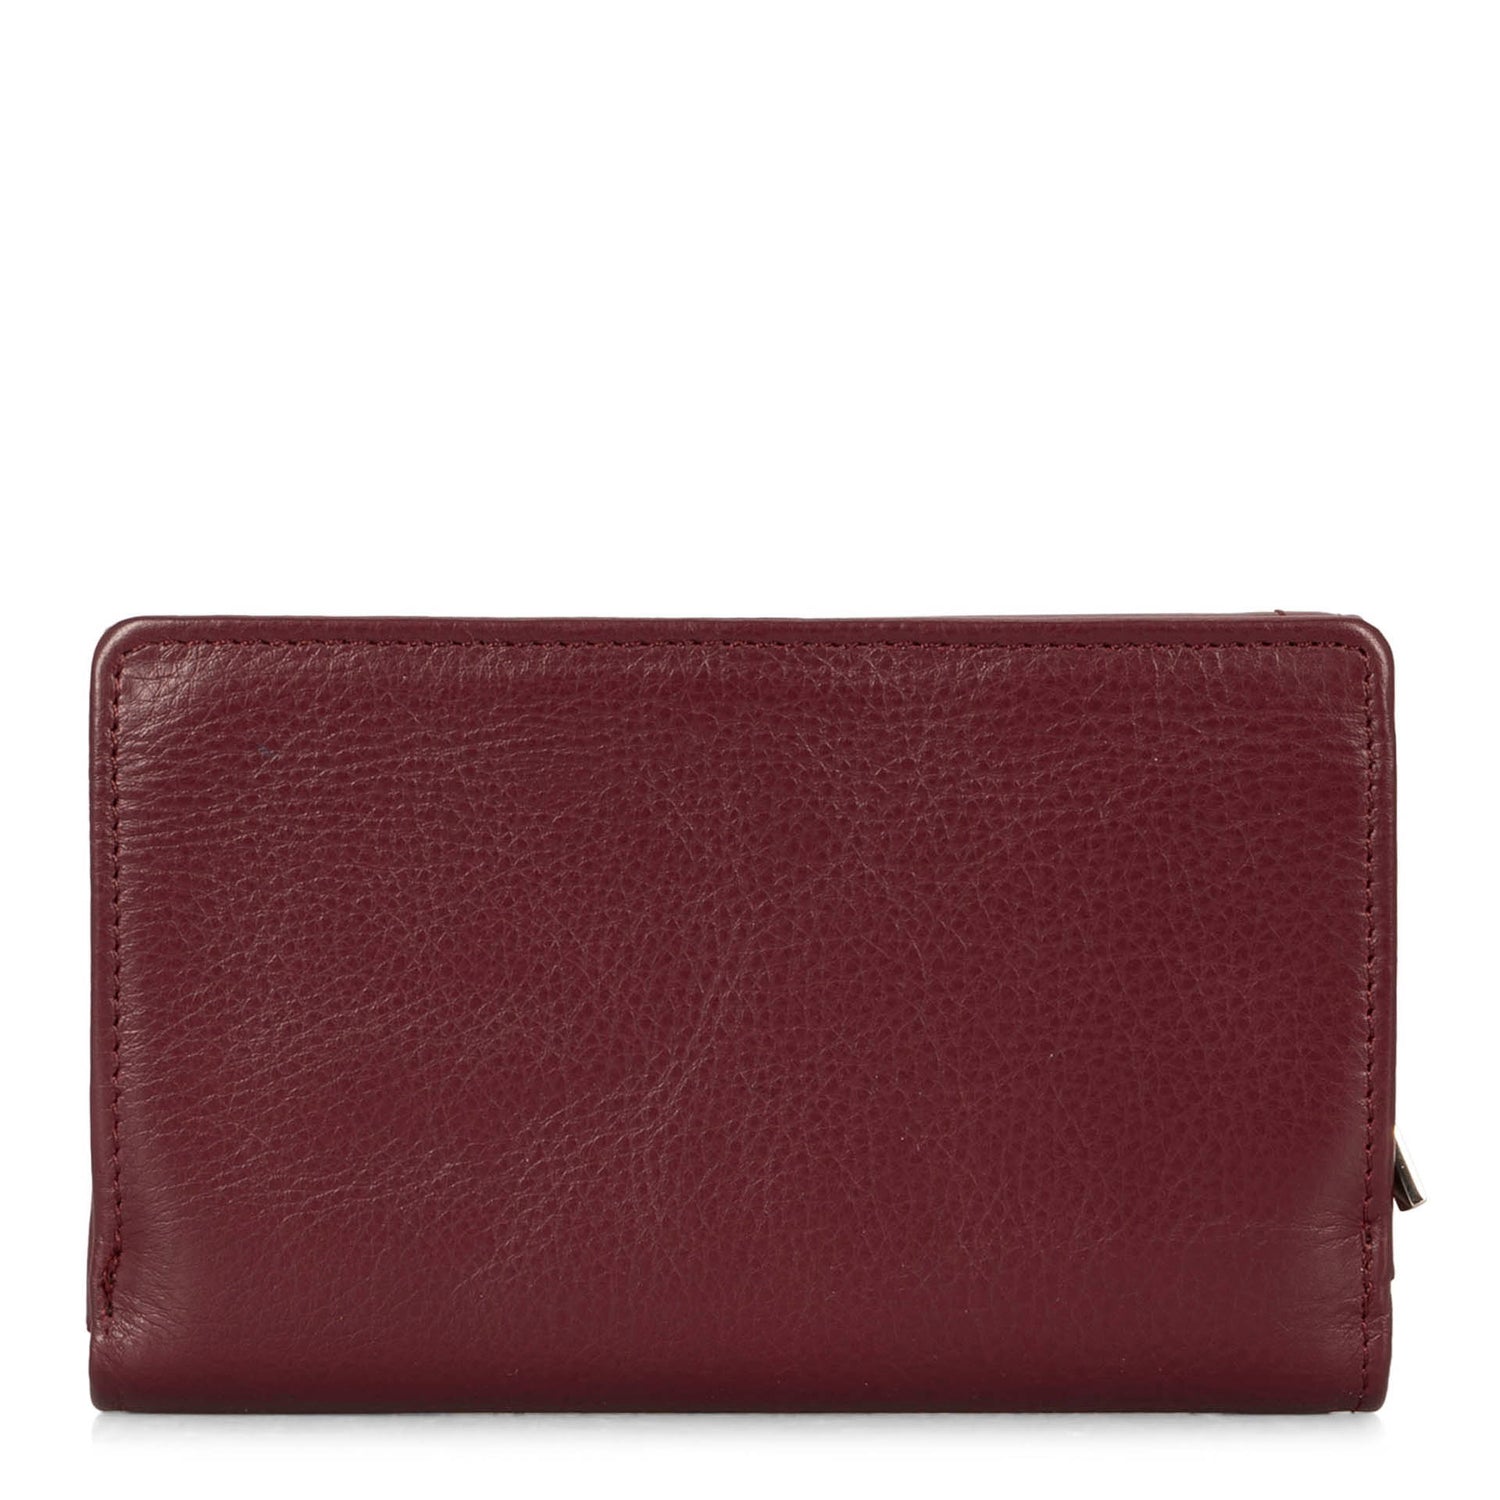 Back side of a burgundy flap wallet for women called Kara designed by Tracker showing its soft leather.